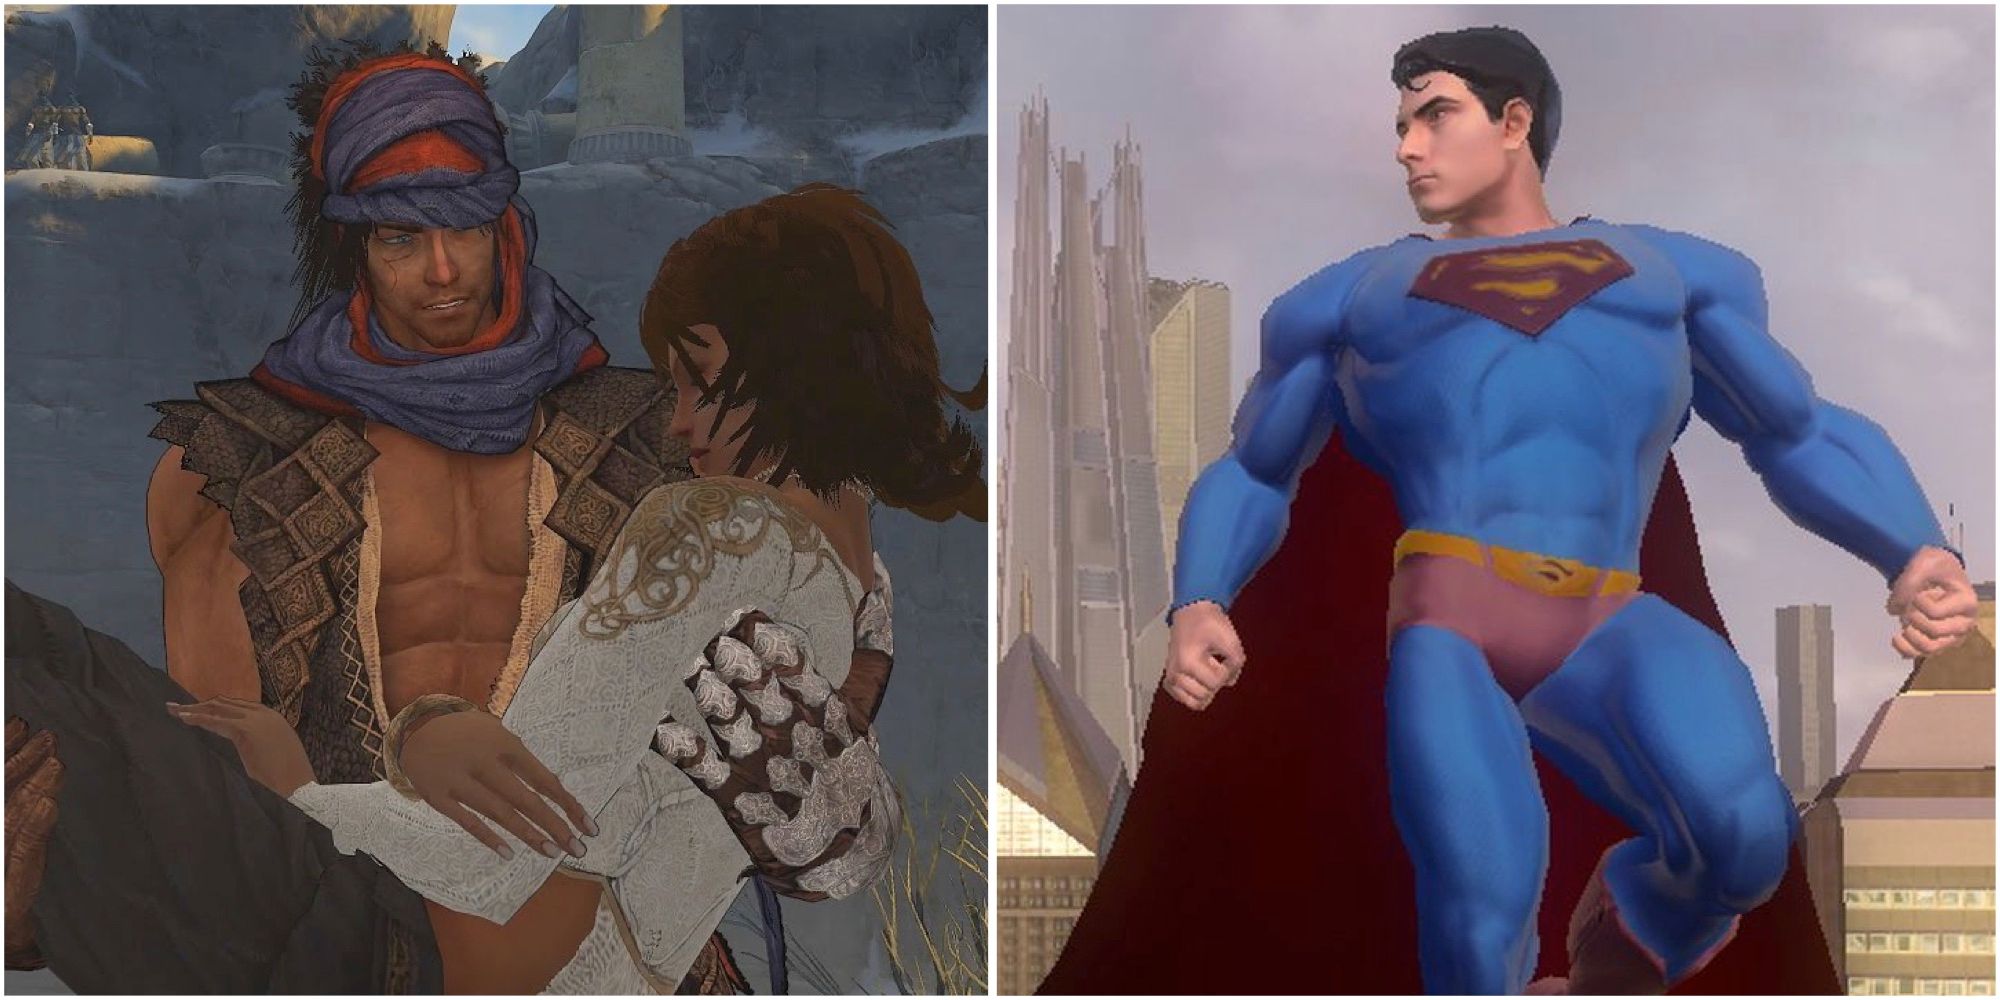 The Prince and Elika in Prince Of Persia (2008) and Superman in Superman Returns